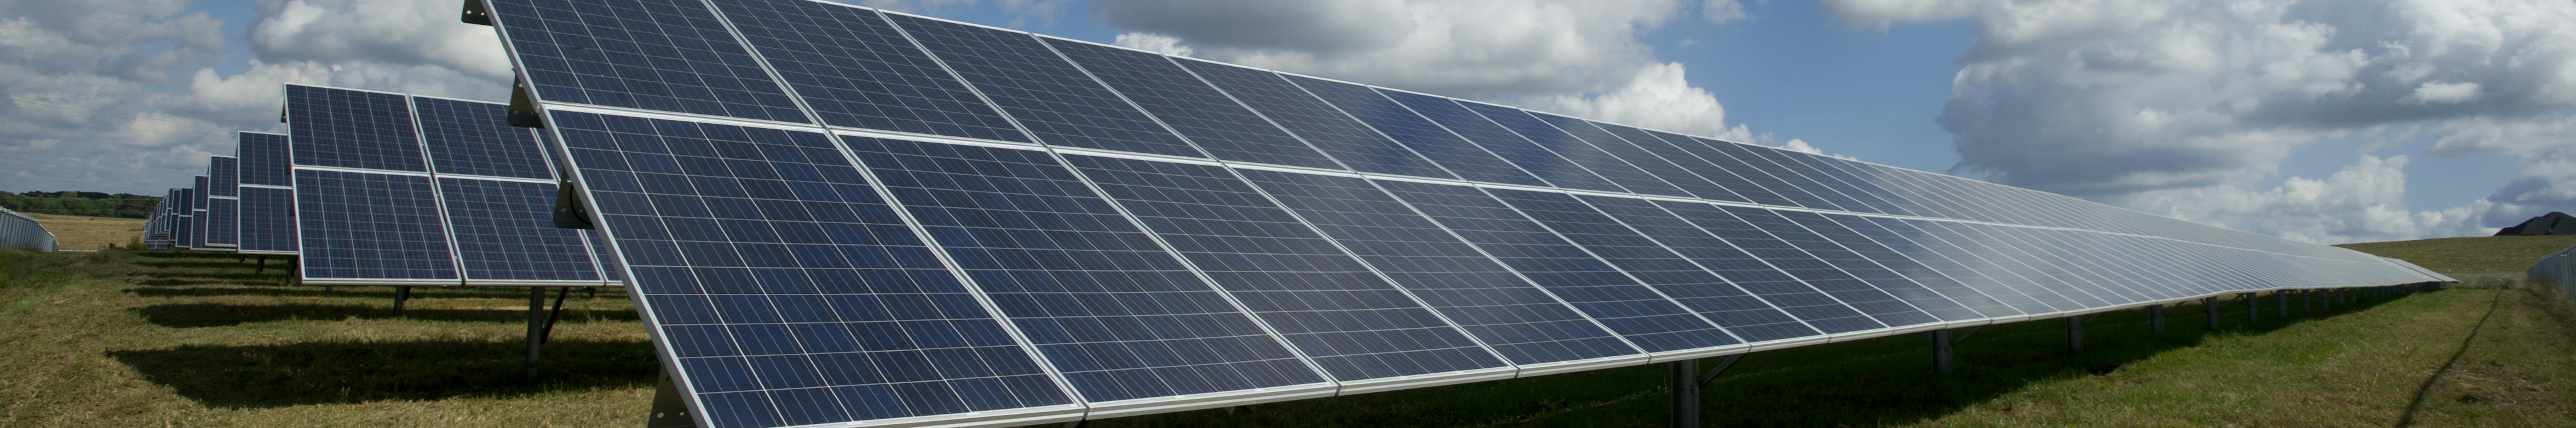 Canadian Solar's solar modules from 2022 will generate an estimated 700,000 tonnes